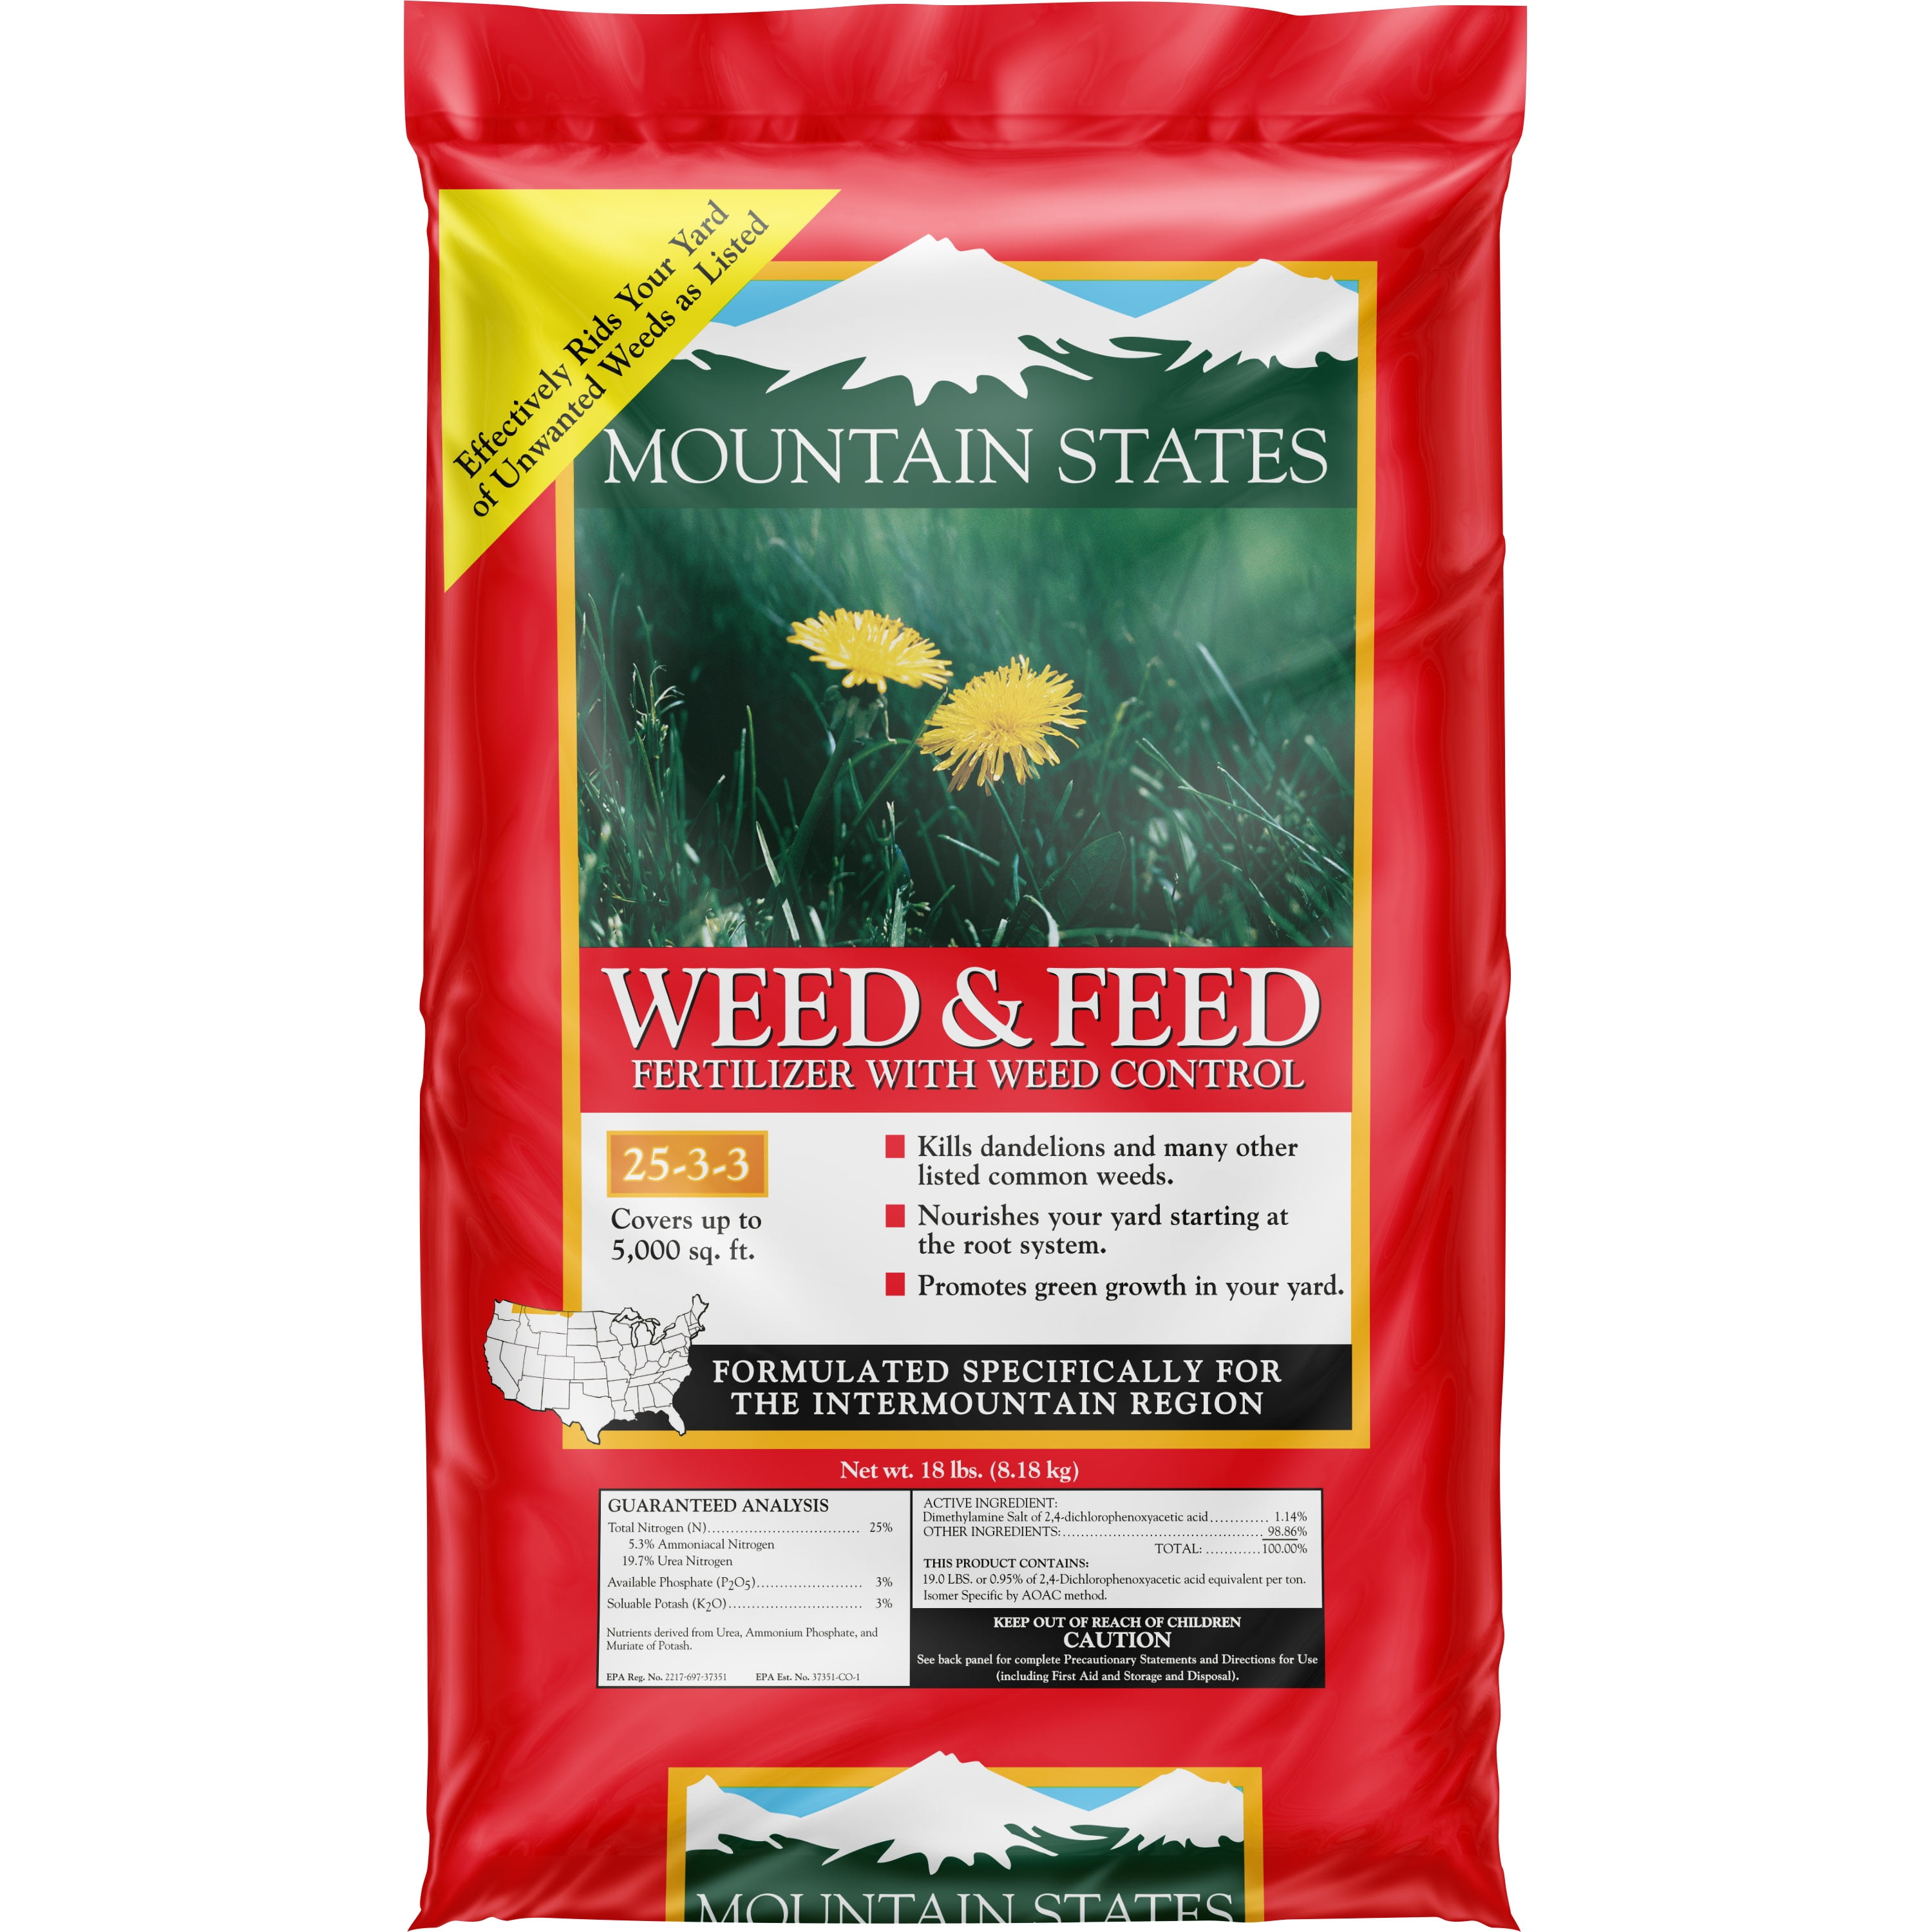 Mountain States Weed & Feed Lawn Fertilizer & Weed Control, Covers